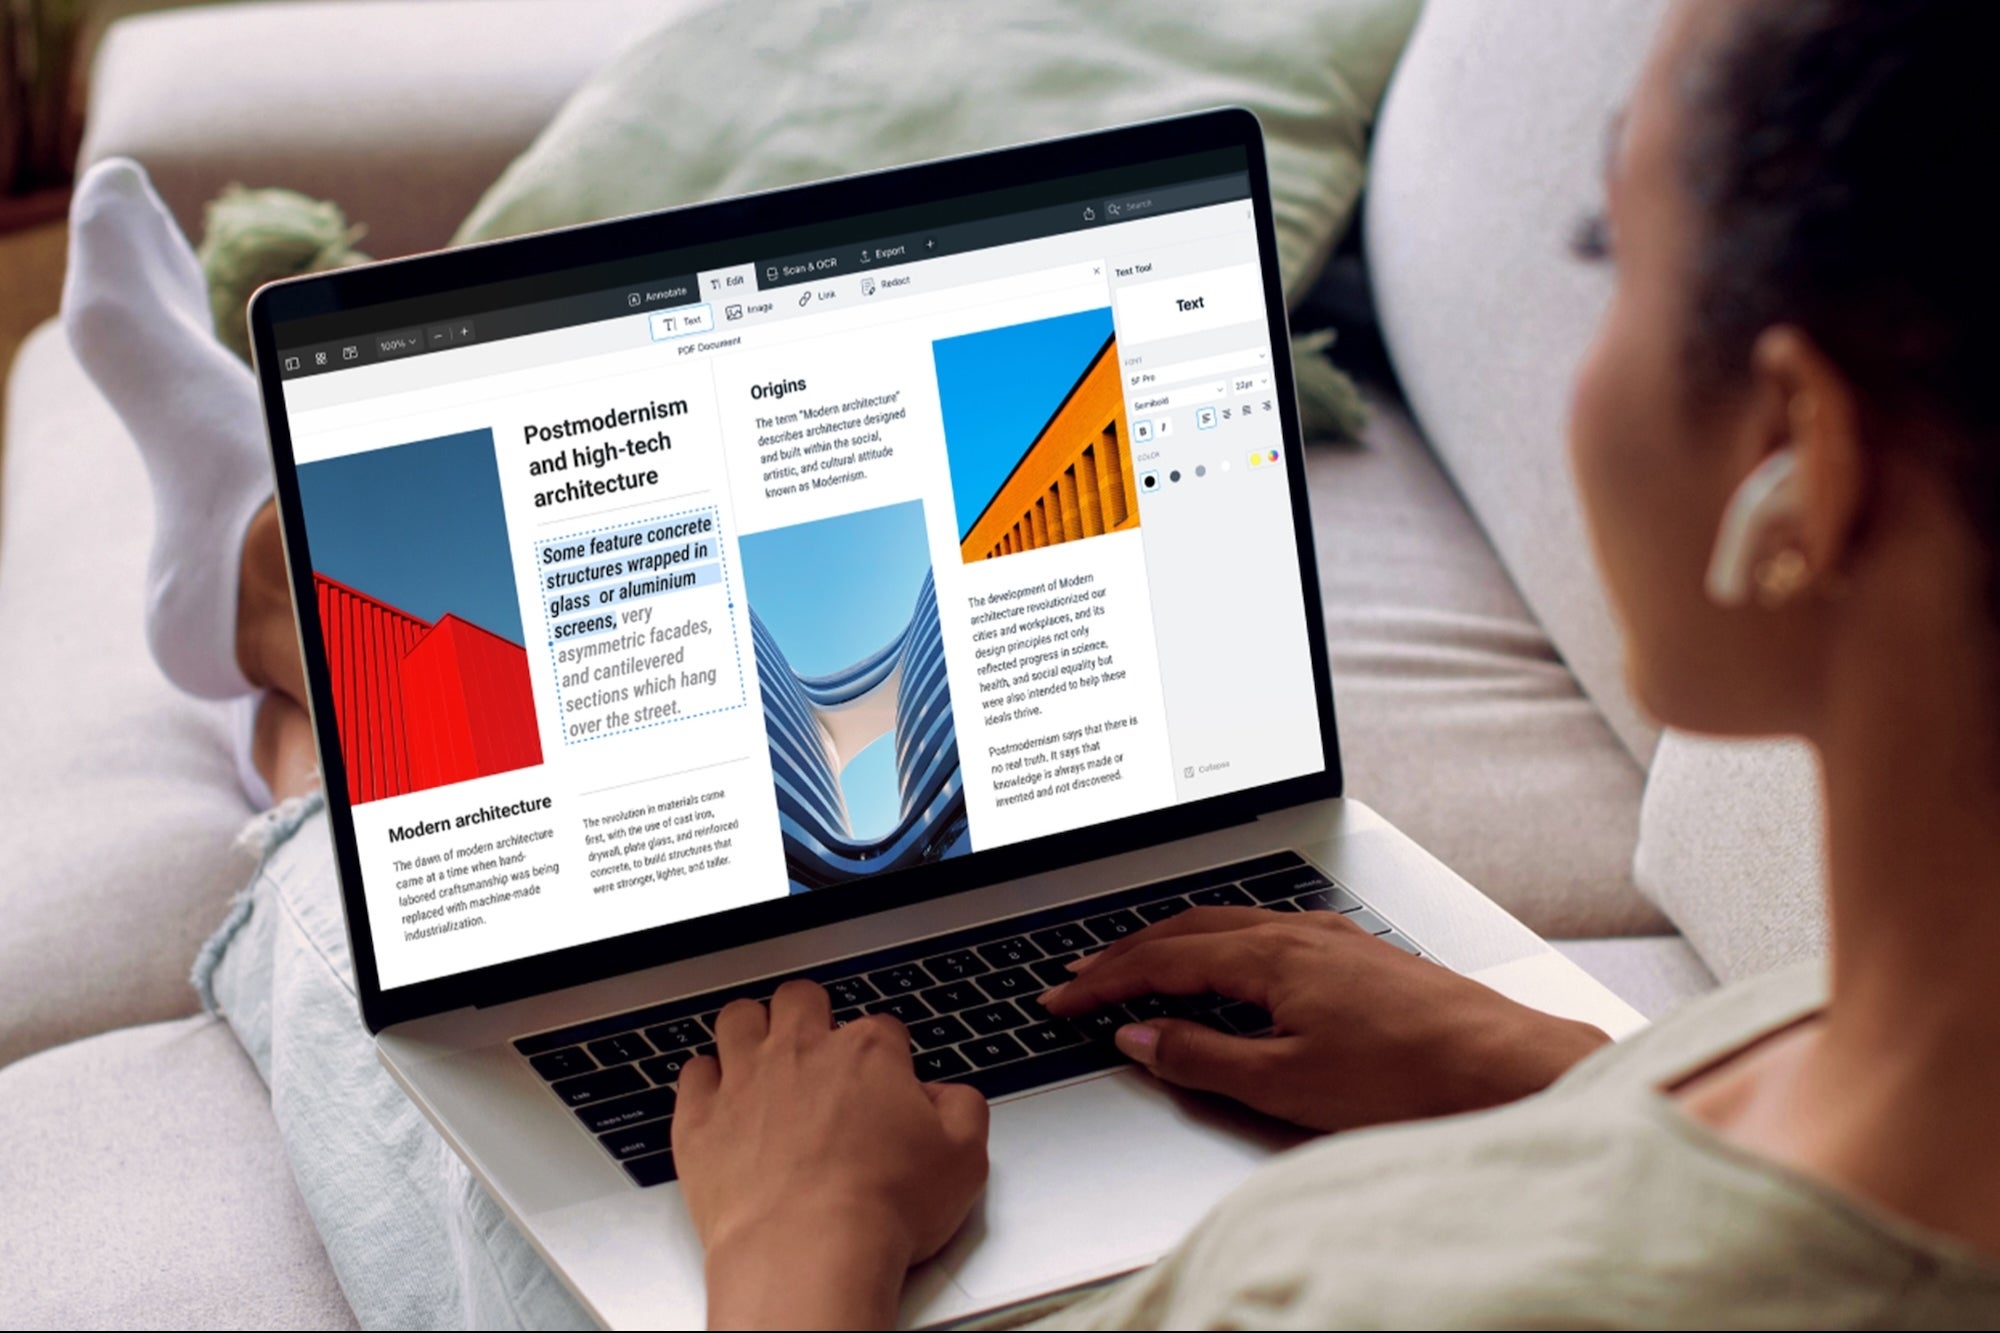 Get the PDF Tool That's Trusted by 30 Million Users for $60 Off